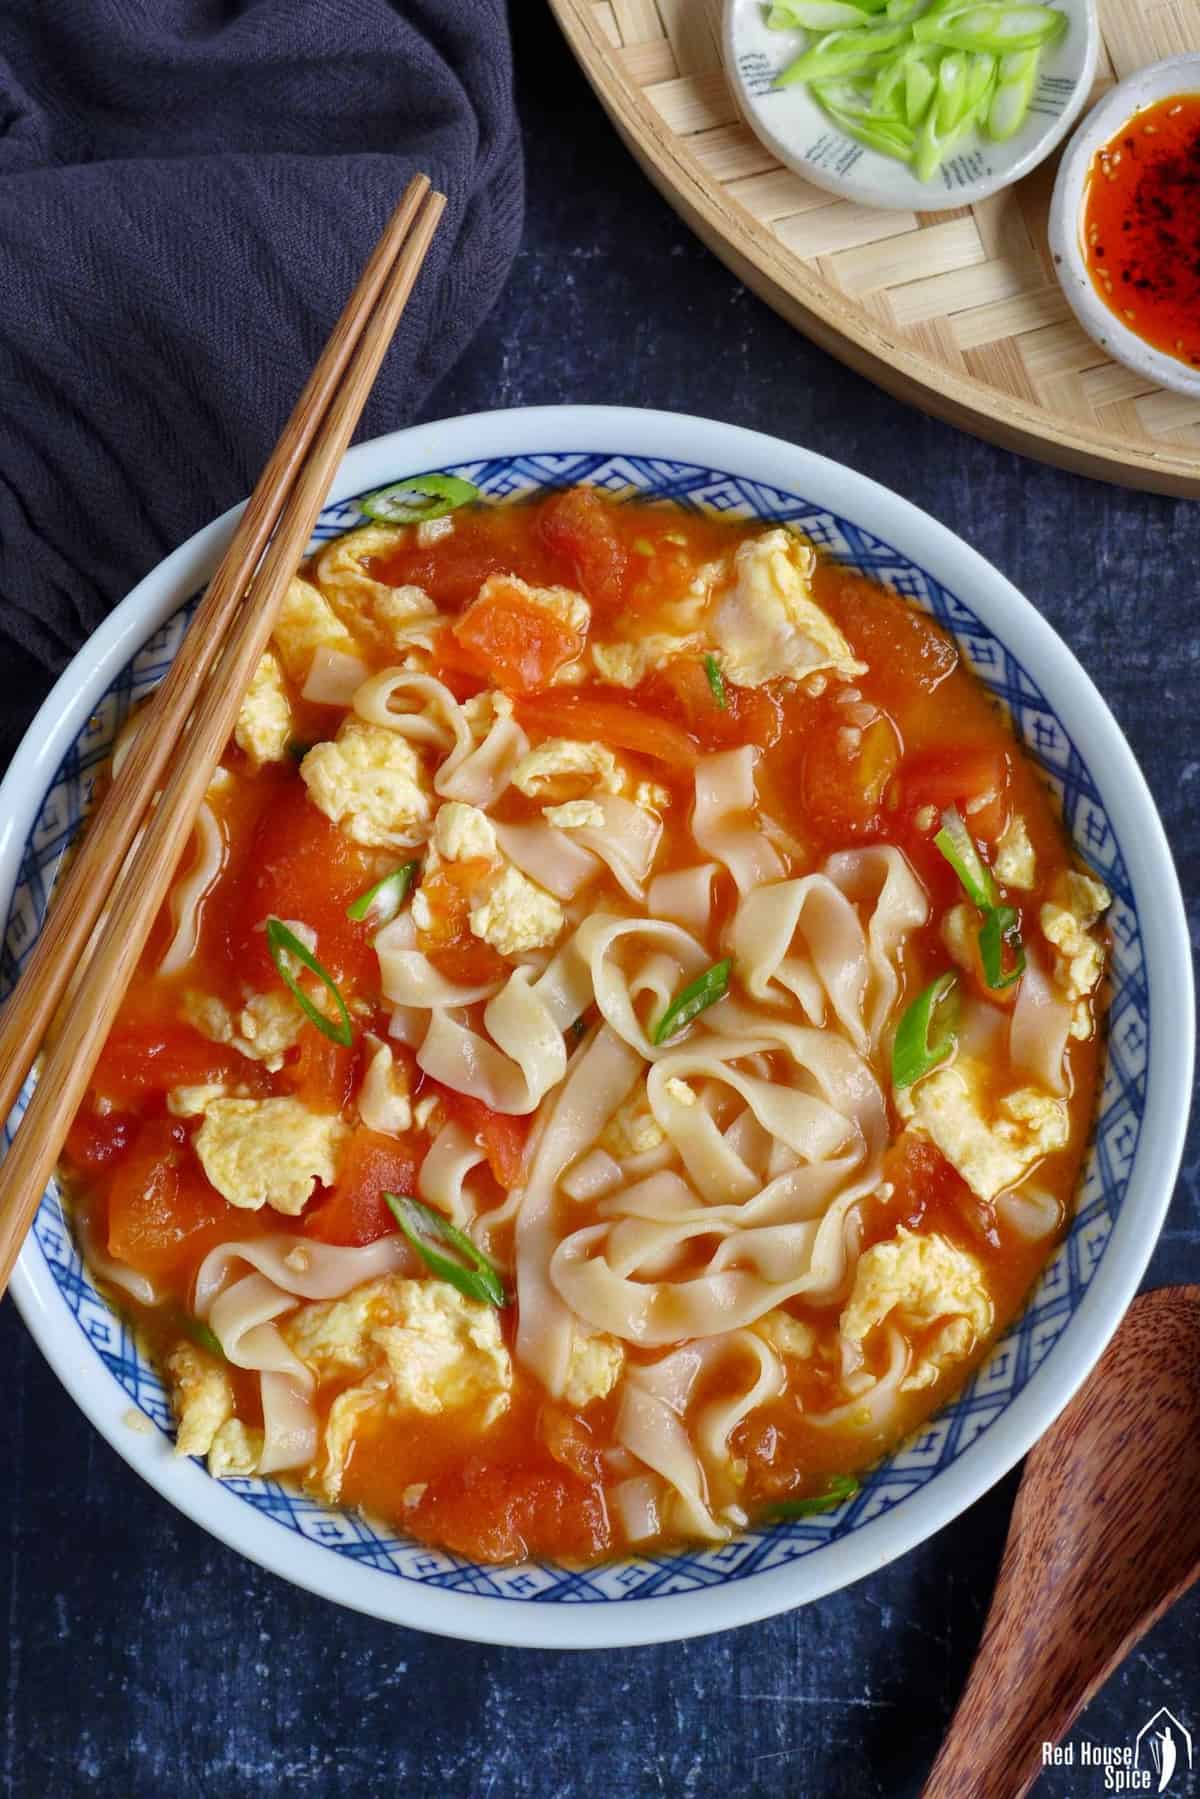 A bowl of Chinese tomato and egg noodle soup